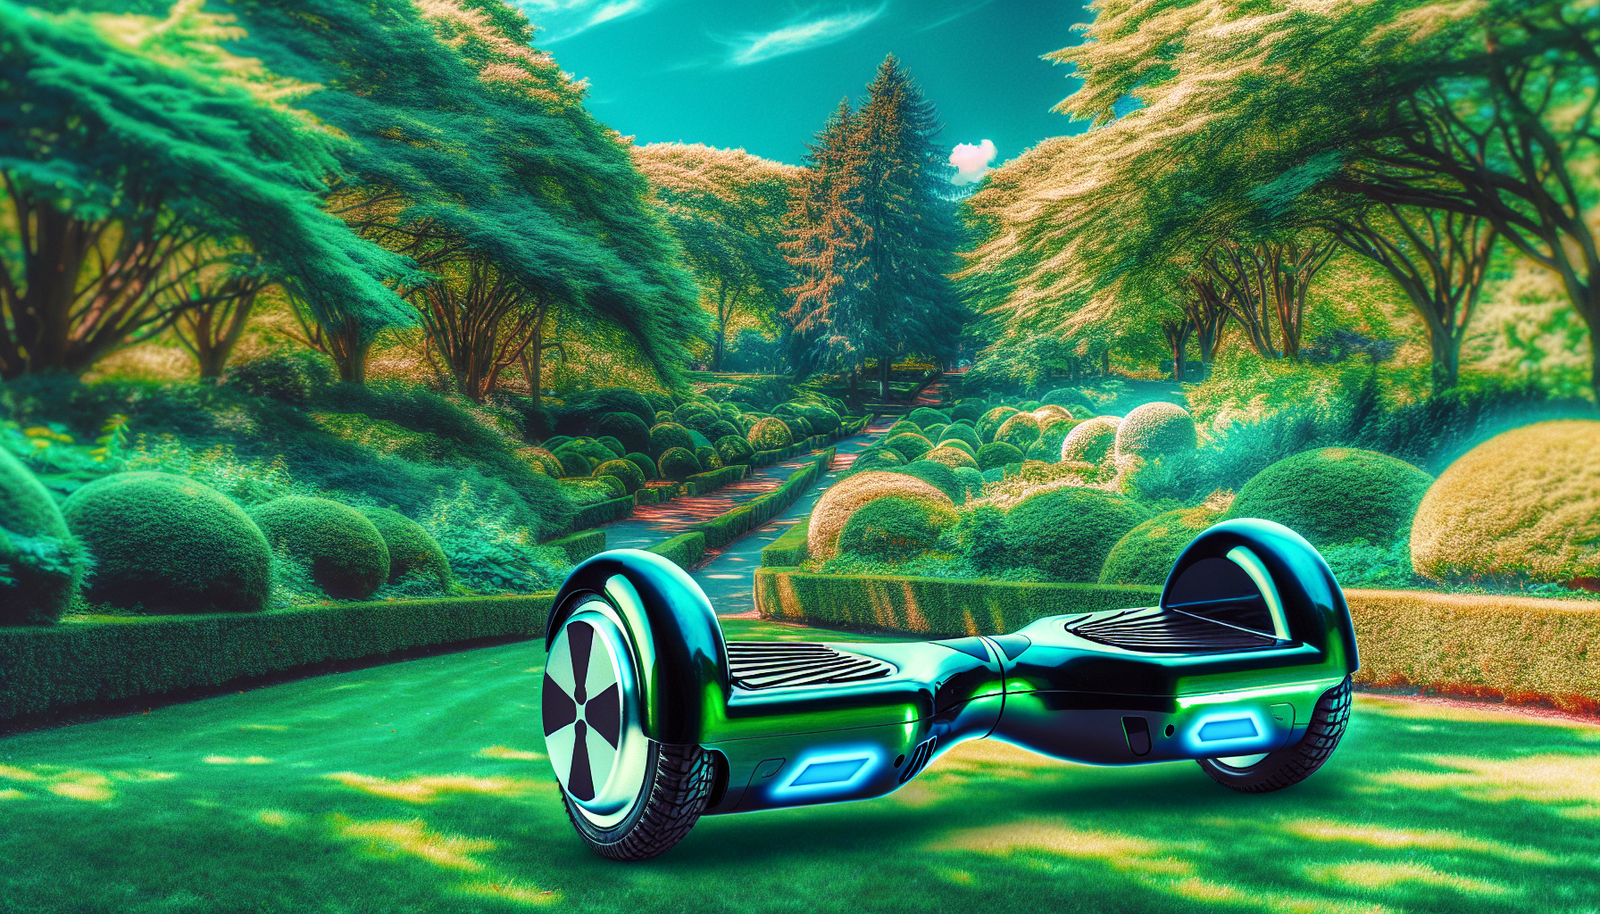 Can I Use A Hoverboard For Recreational Purposes Like Riding In Parks?